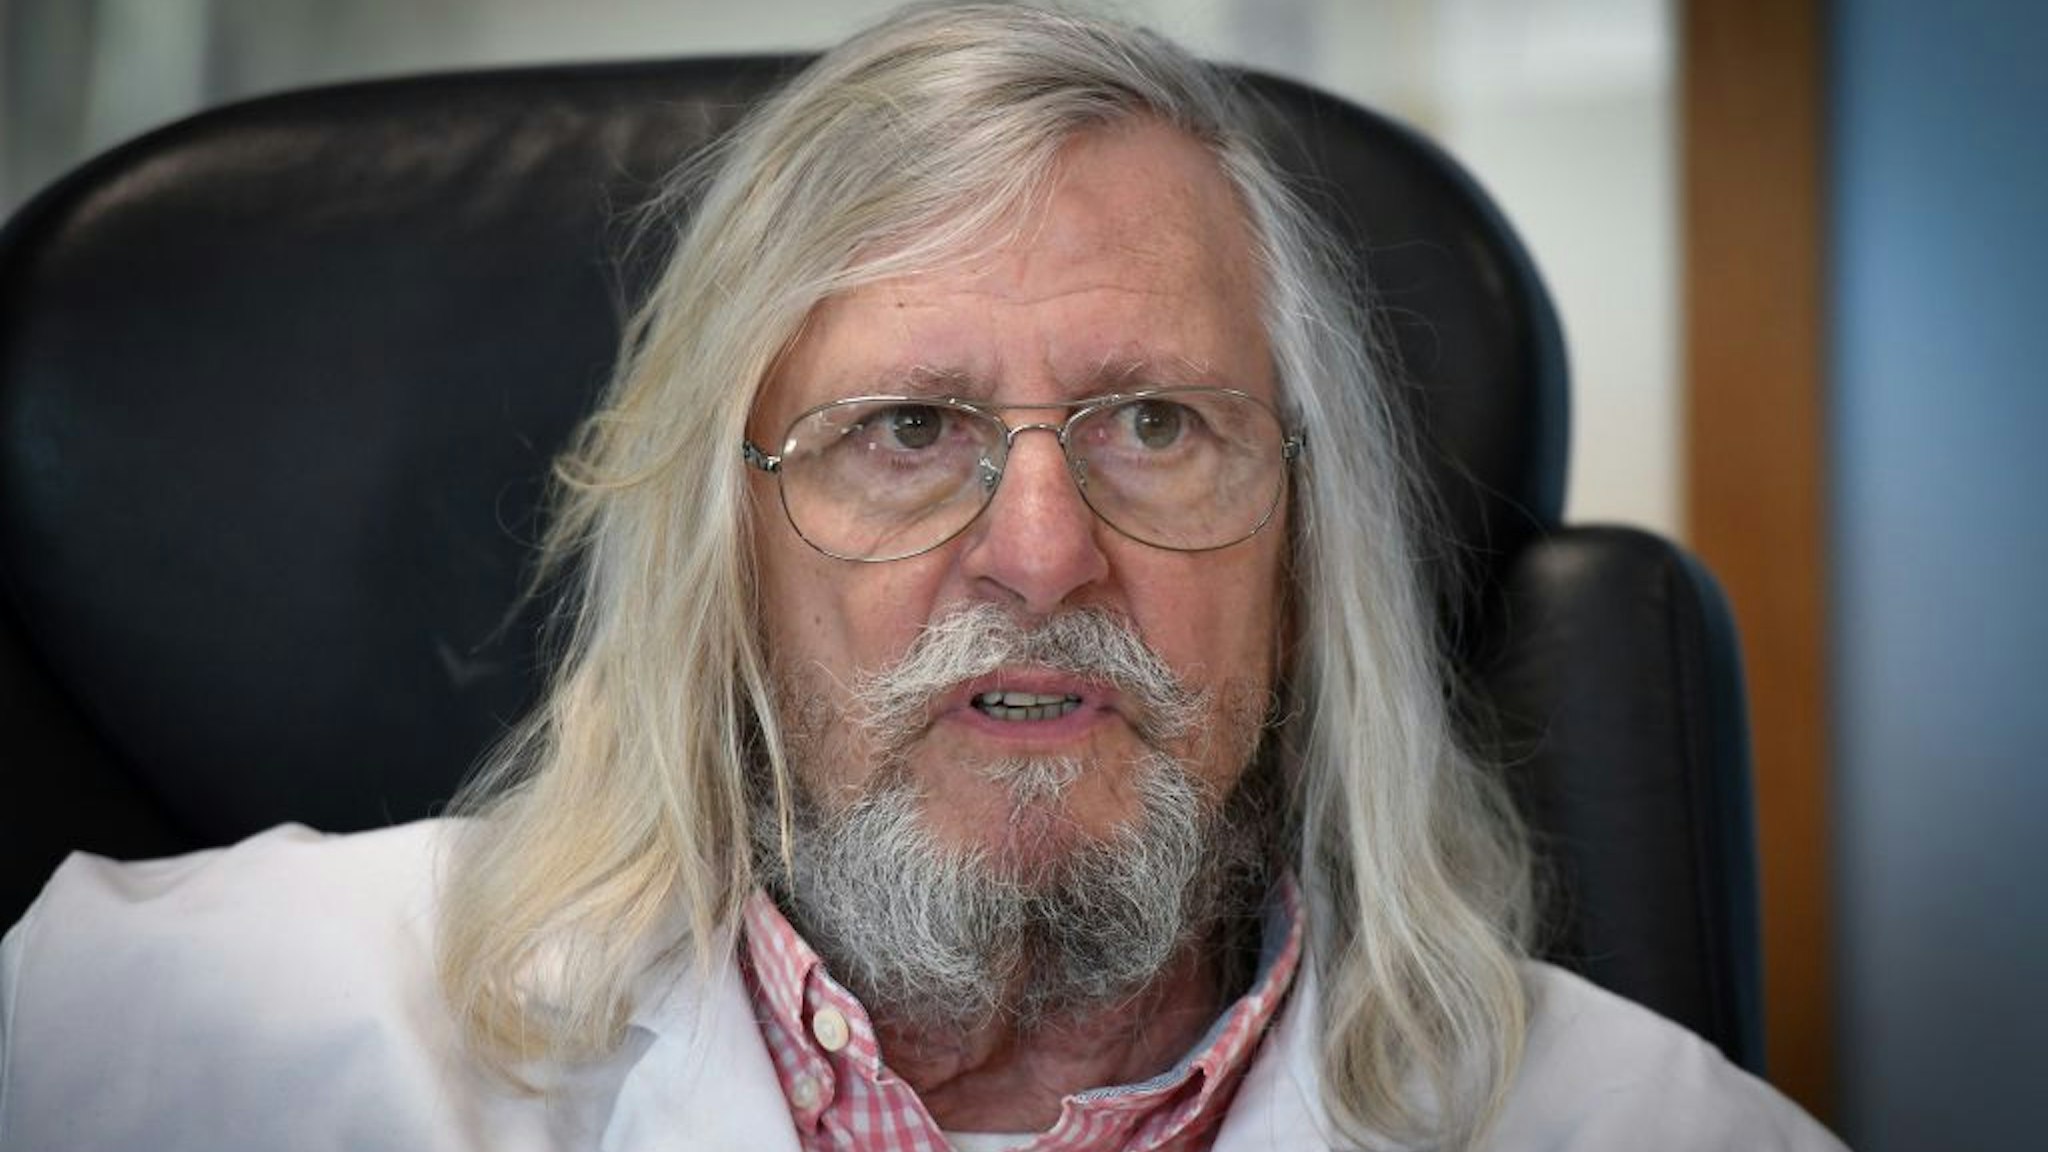 A picture taken on February 26, 2020 shows French professor Didier Raoult, biologist and professor of microbiology, specialized in infectious diseases and director of IHU Mediterranee Infection Institute posing in his office in Marseille, southeastern France.